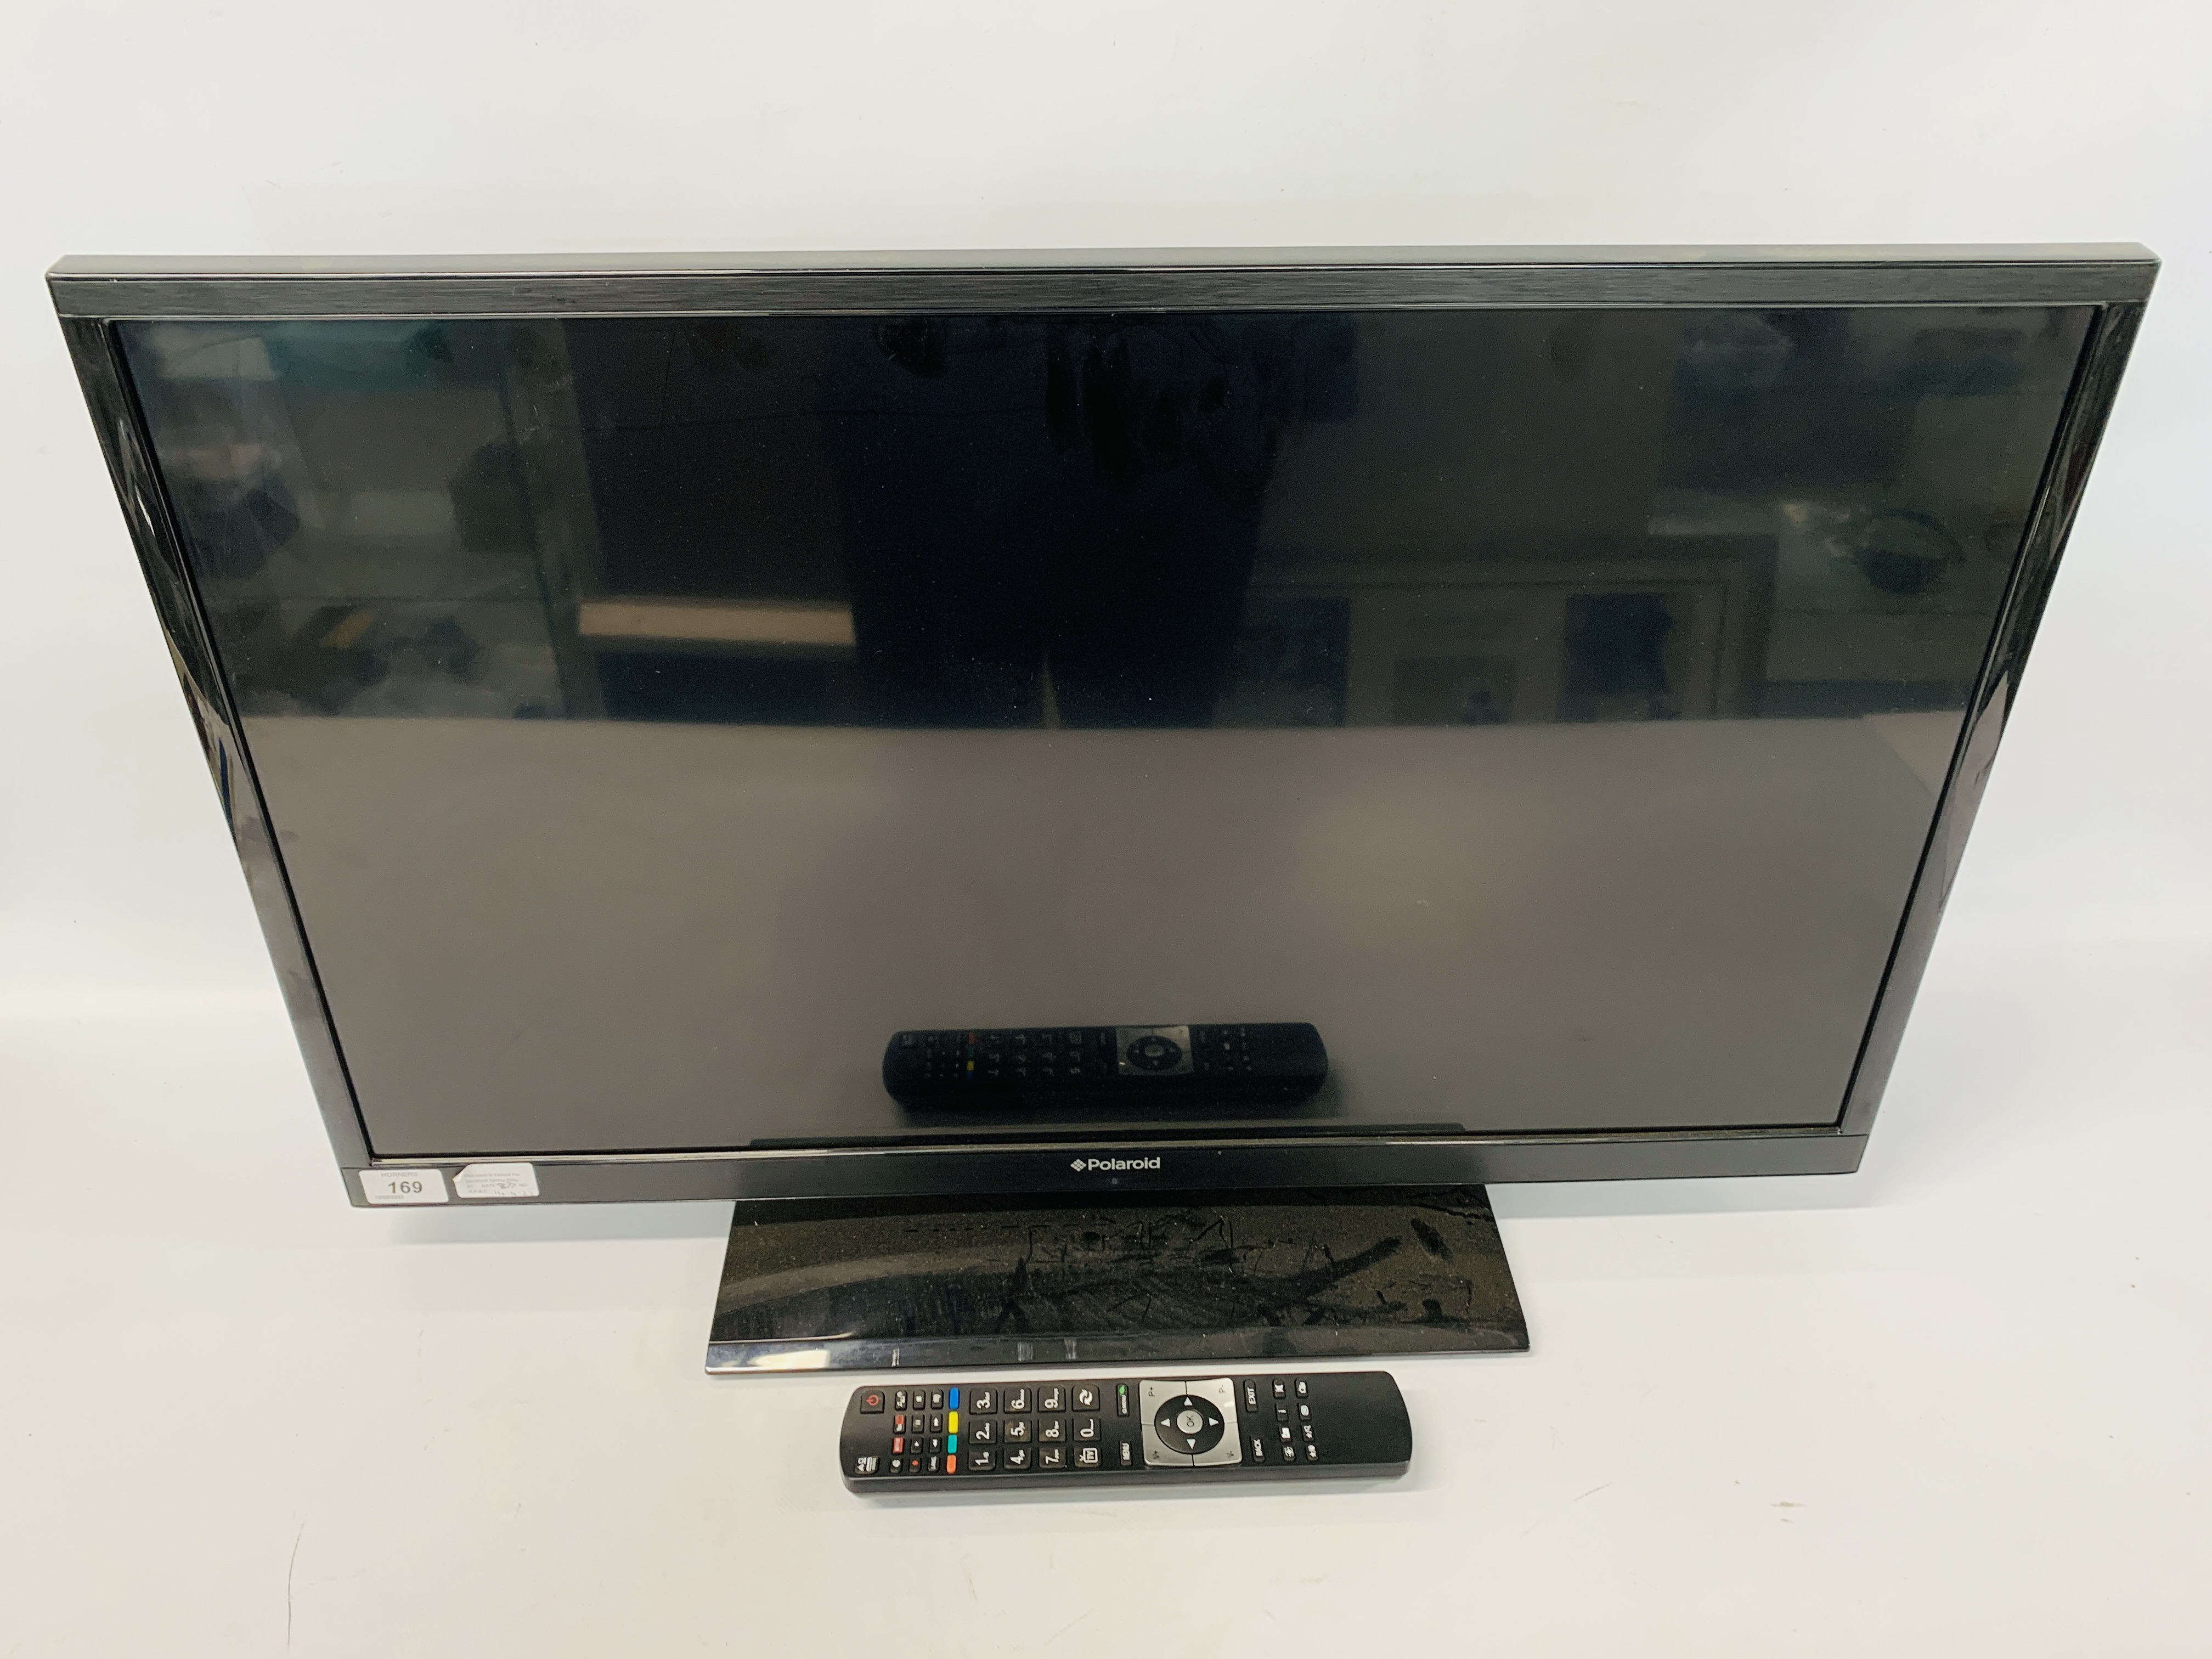 A POLAROID 32 INCH FLAT SCREEN TV MODEL P32LED13 - SOLD AS SEEN.